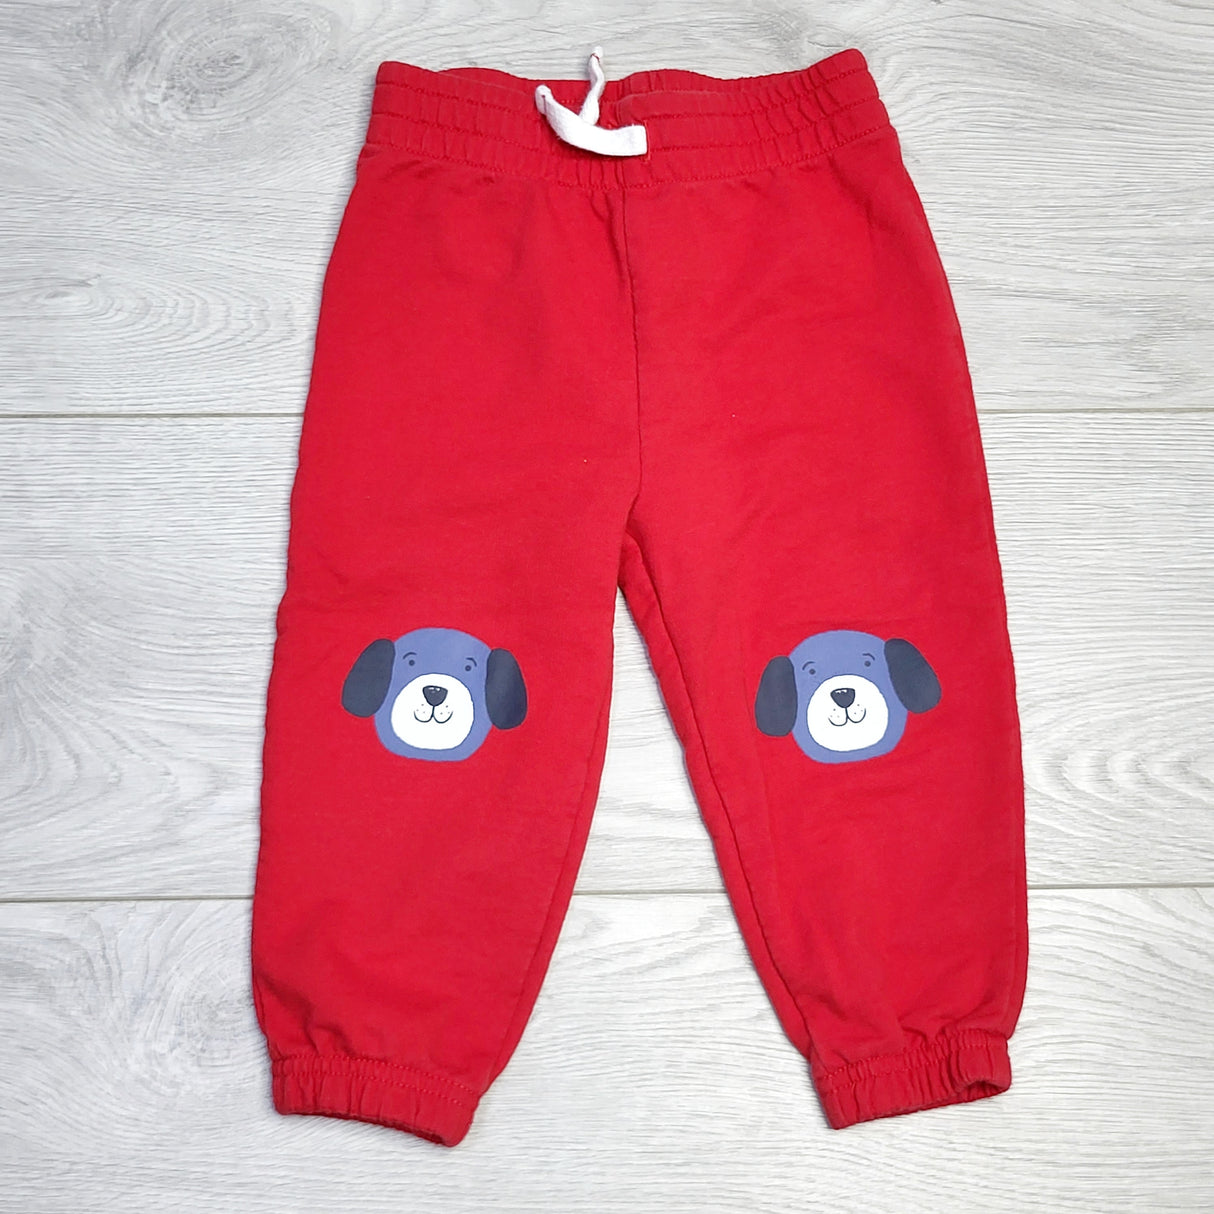 RZA2 - Joe red cotton pants with puppies. Size 12-18 months